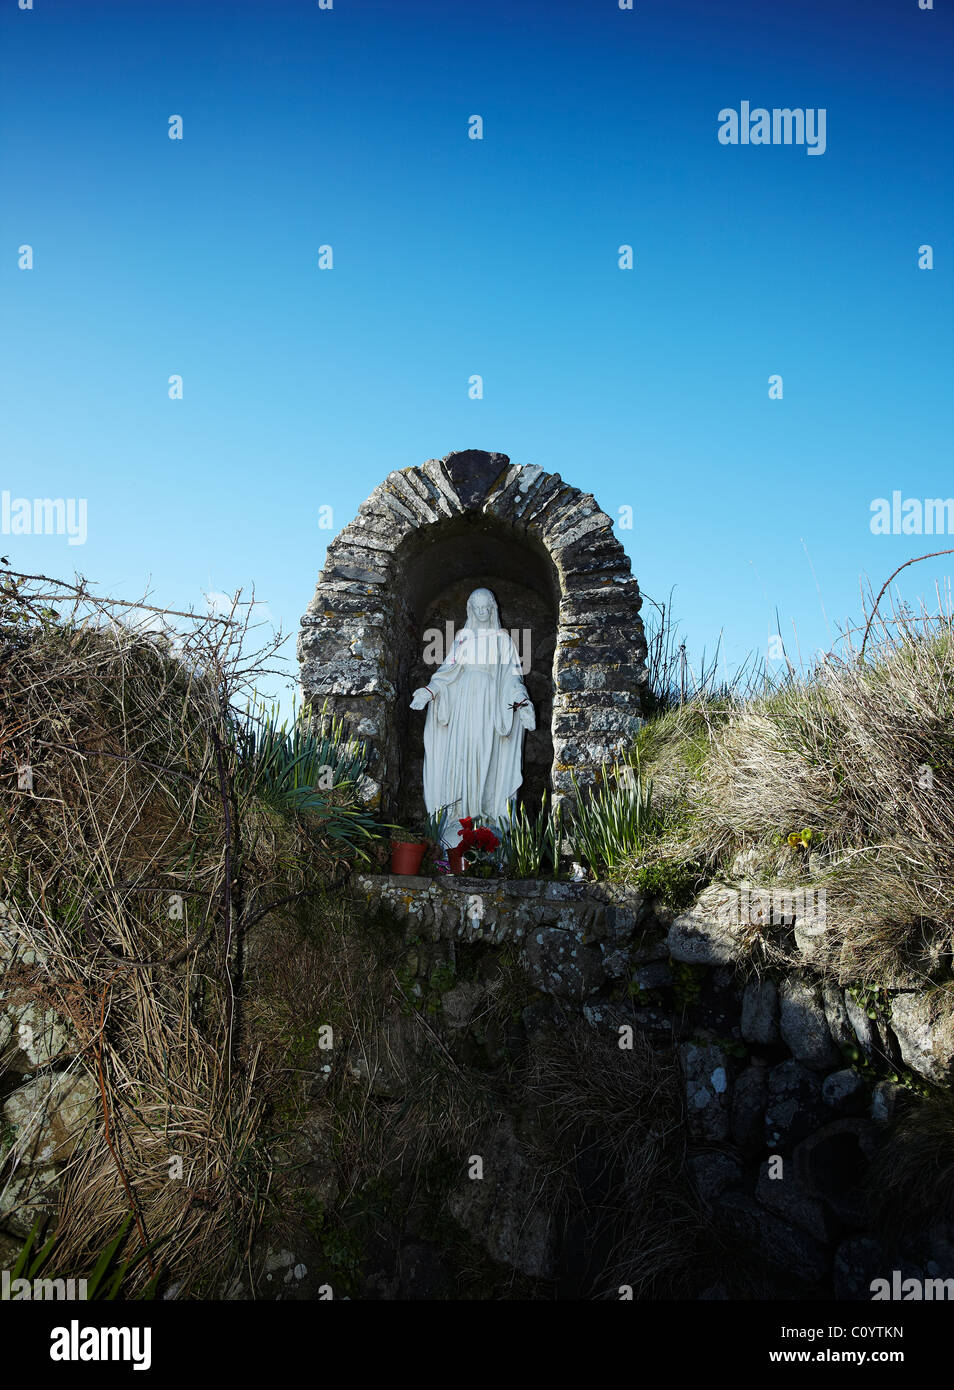 Shrine and Statue of St Non, mother of St David, St Non's Well, near St Davids, Pembrokeshire, Wales, UK Stock Photo